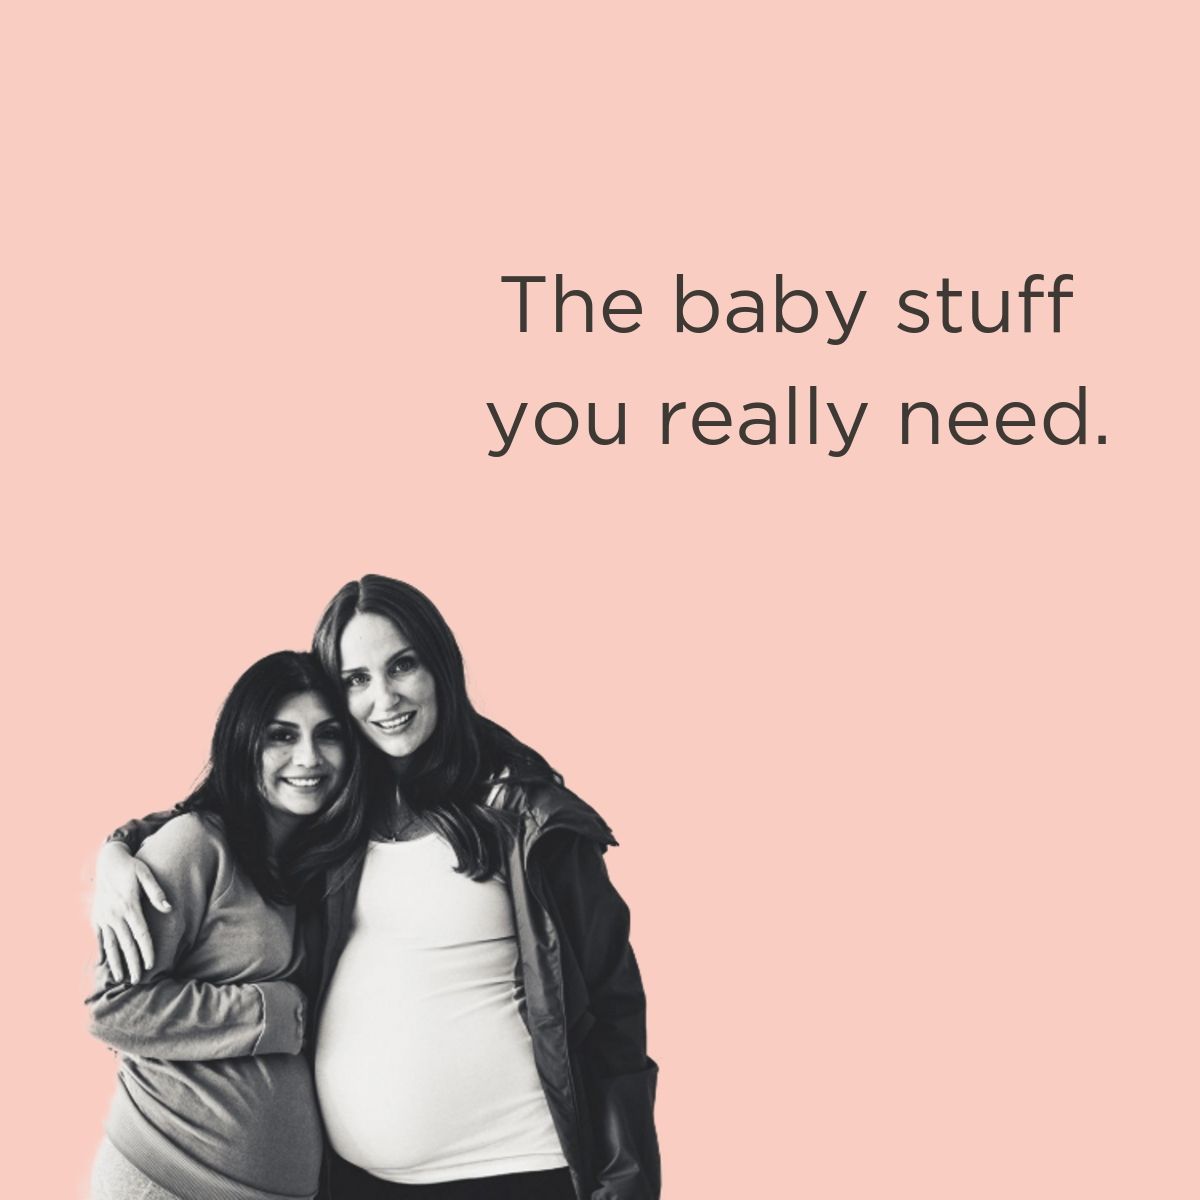 The baby stuff you really need